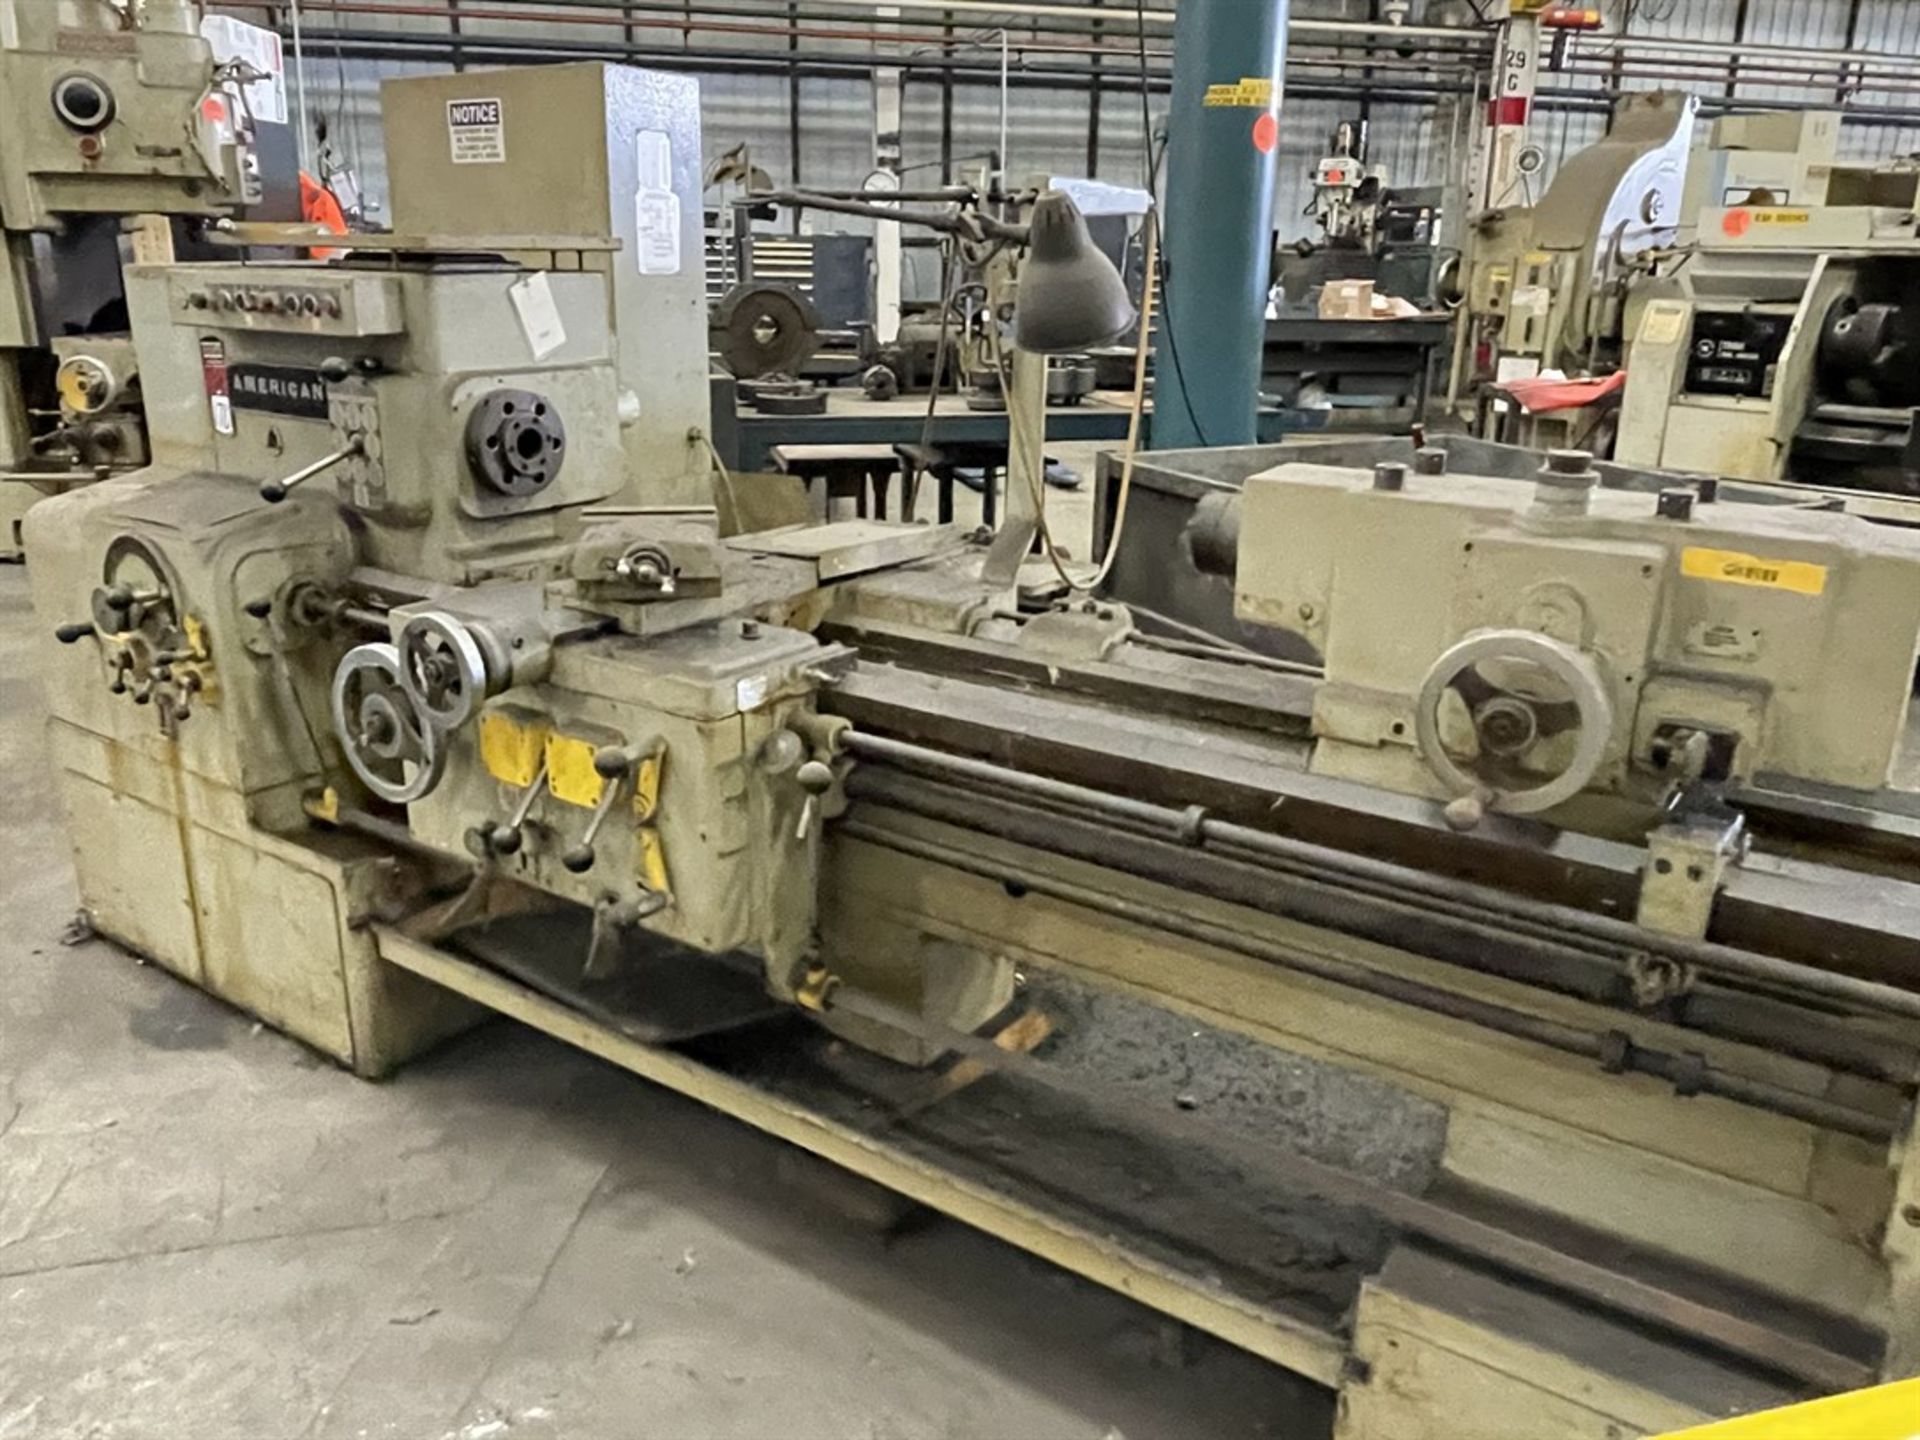 AMERICAN STYLE B 14" x 54" Lathe, s/n 80208-77, 14" Swing, 54" Centers, 30-2000 RPM Spindle Speed, - Image 2 of 7